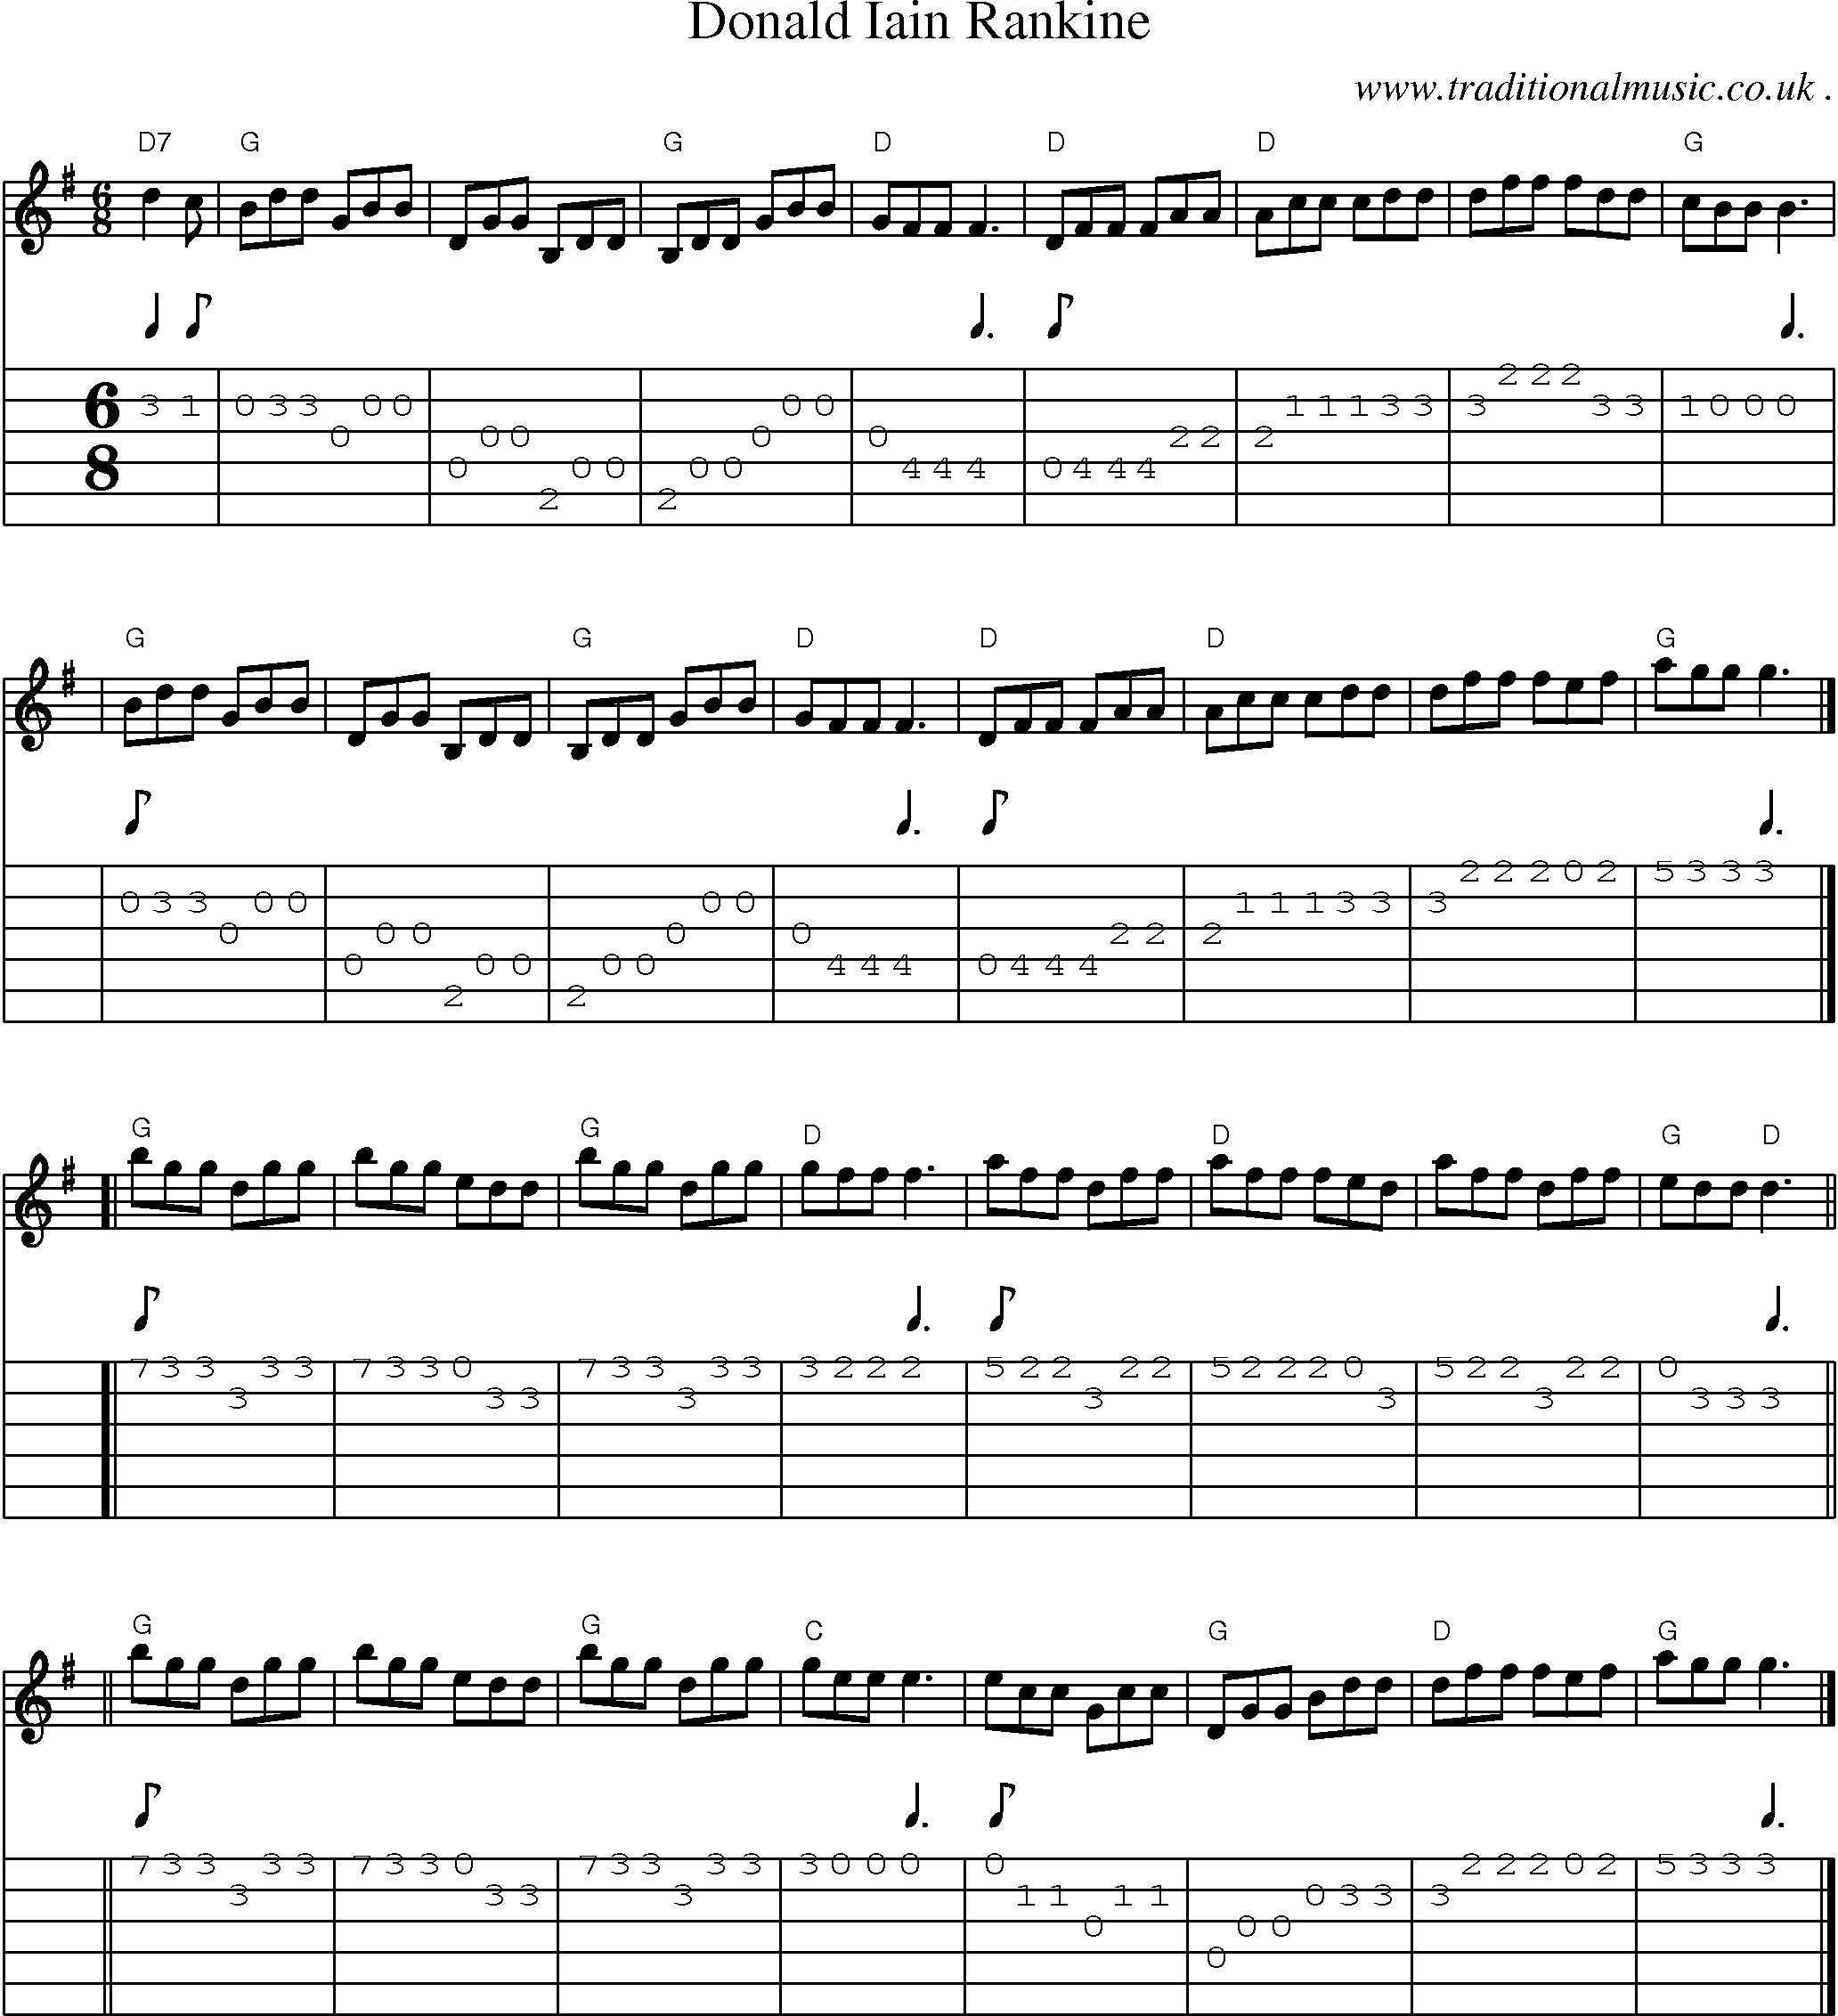 Sheet-music  score, Chords and Guitar Tabs for Donald Iain Rankine